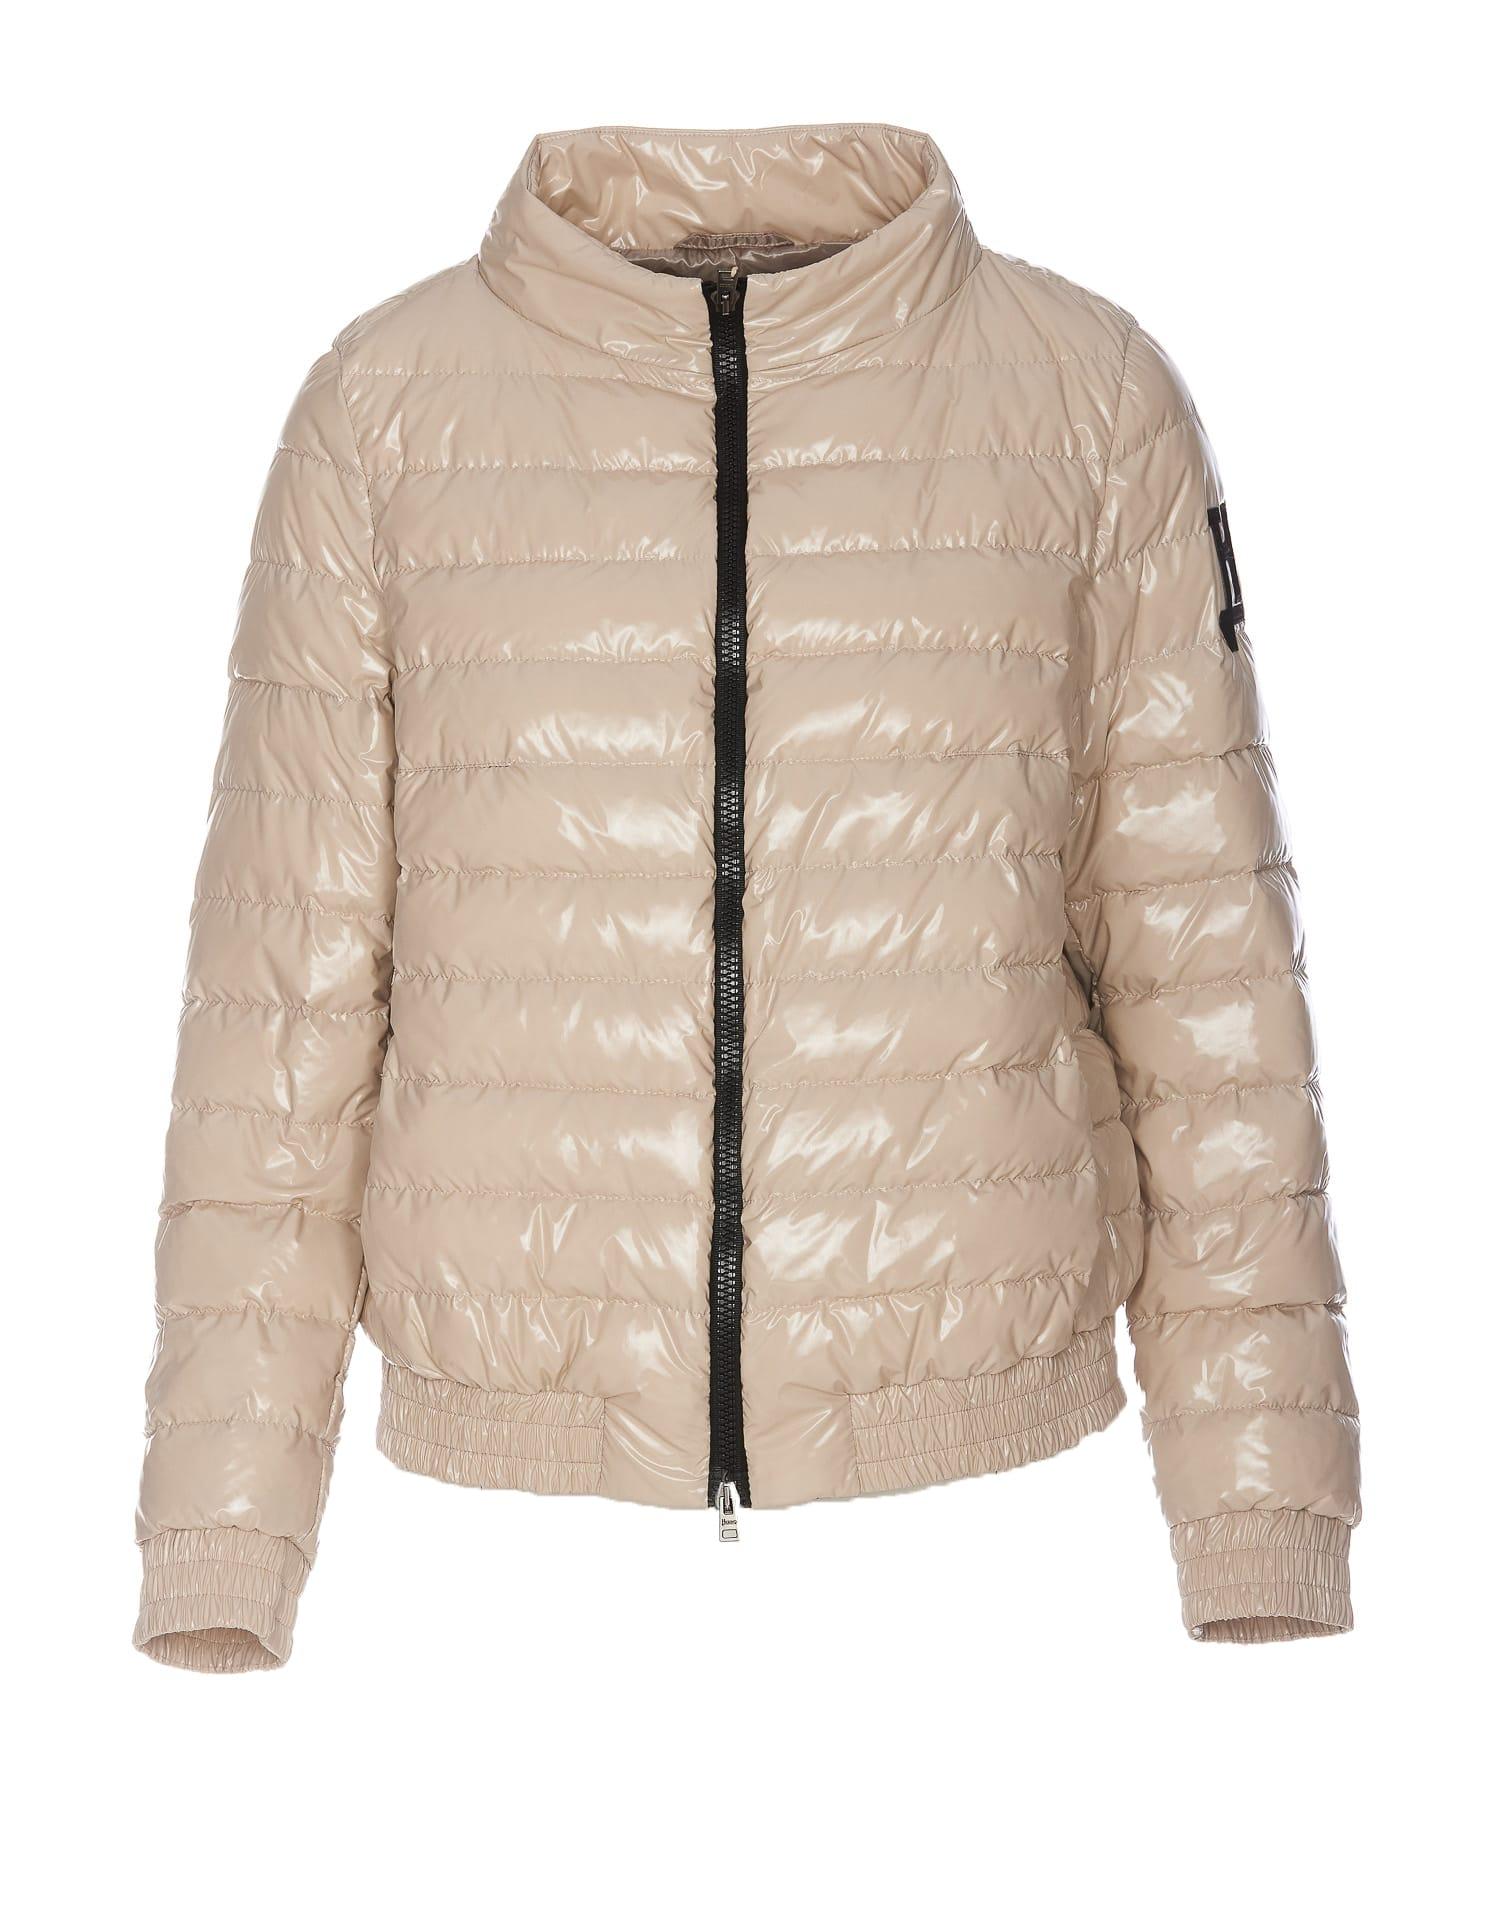 Herno Gloss Bomber Jacket in Natural | Lyst